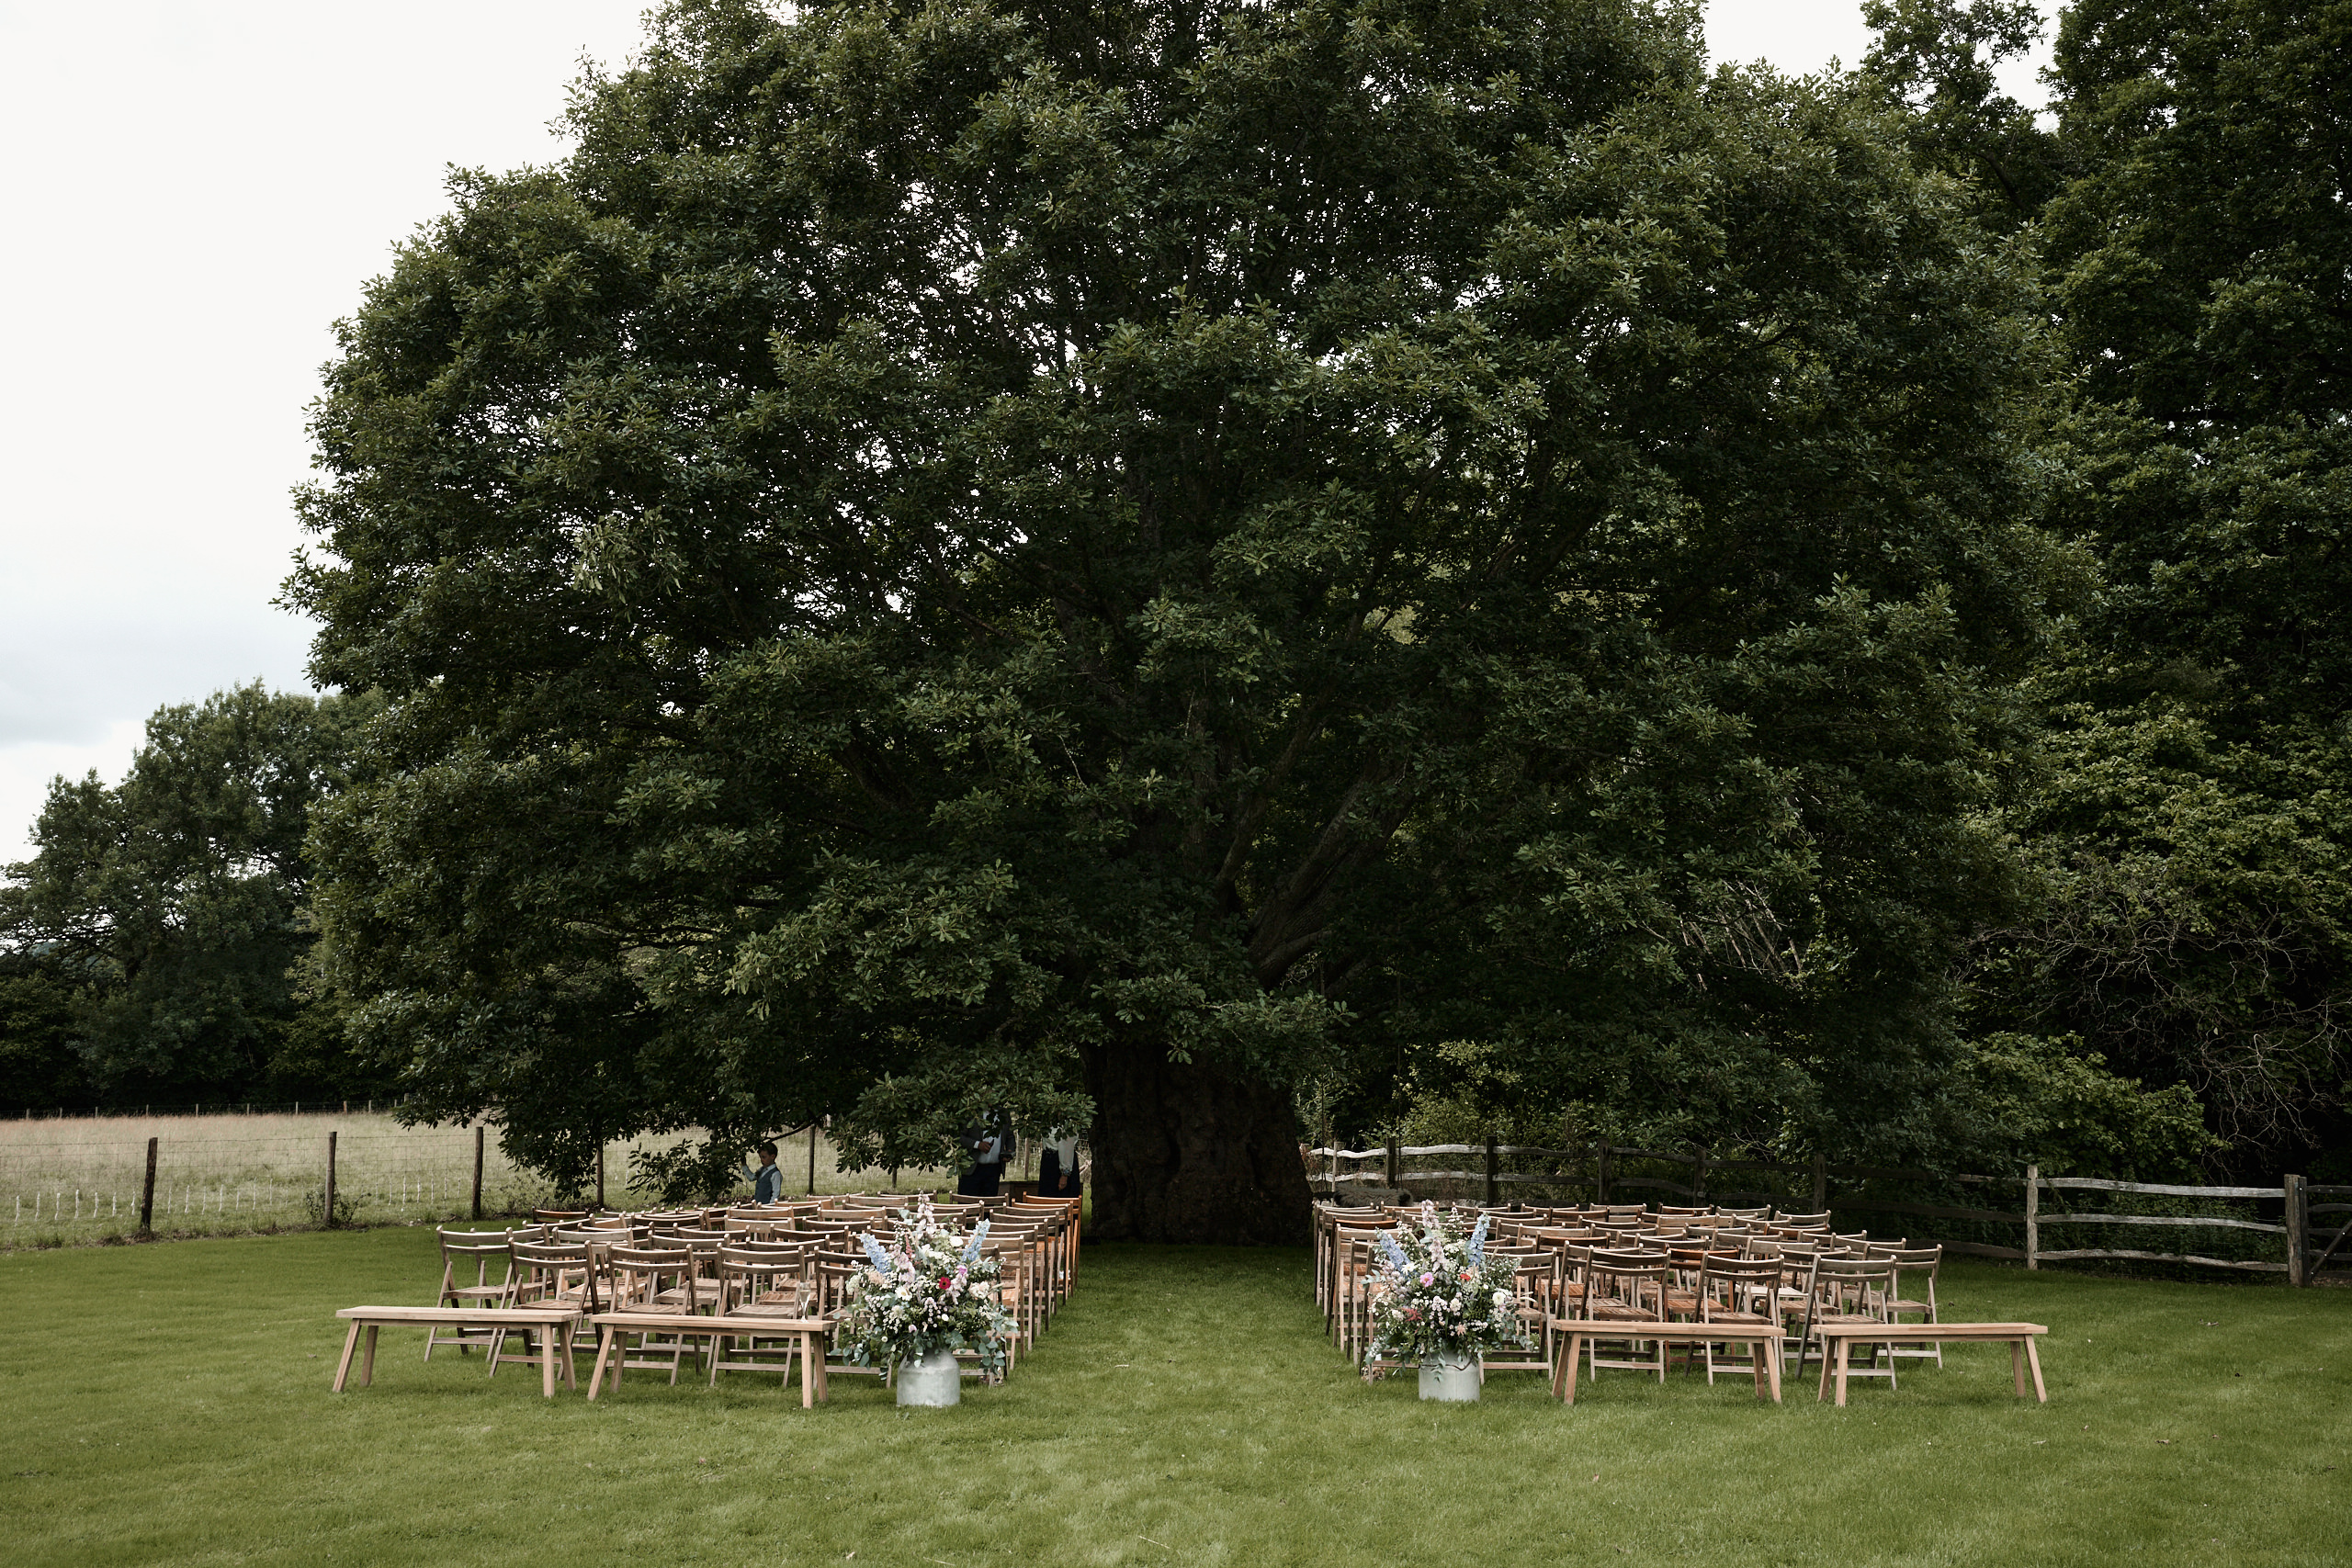 A wedding ceremony is held in front of a big tree.